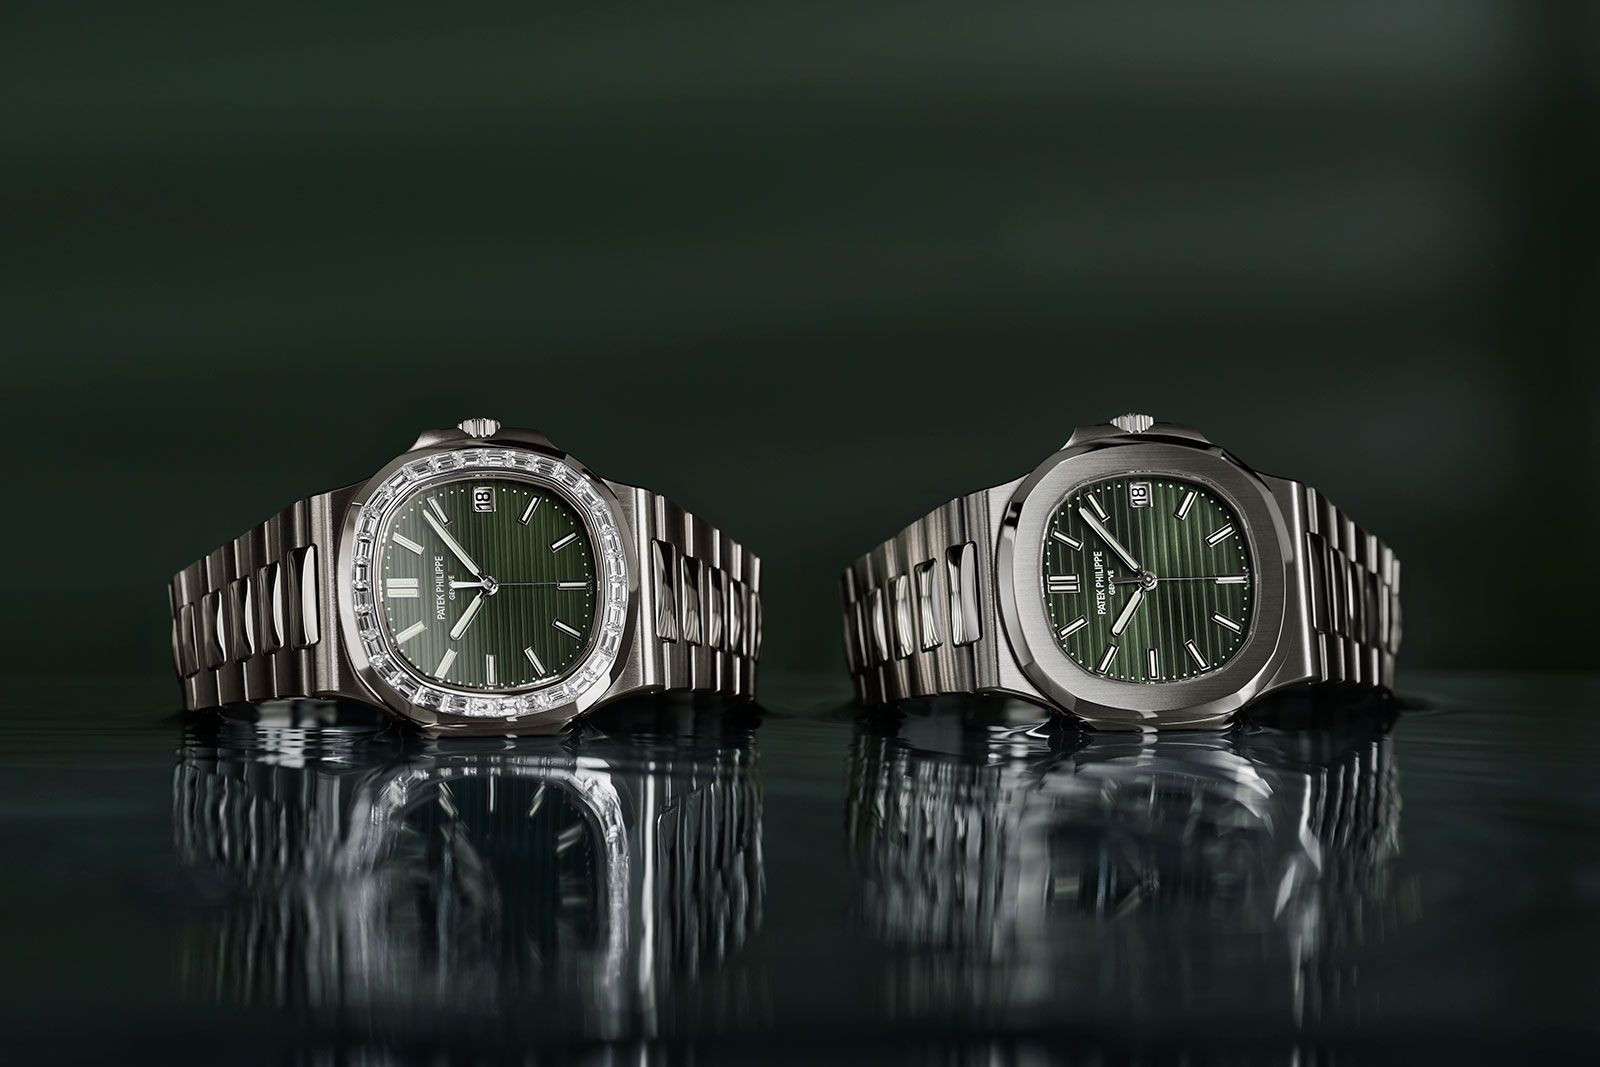 Patek Philippe Nautilus Review & Why It's The Best Luxury Sports Watch